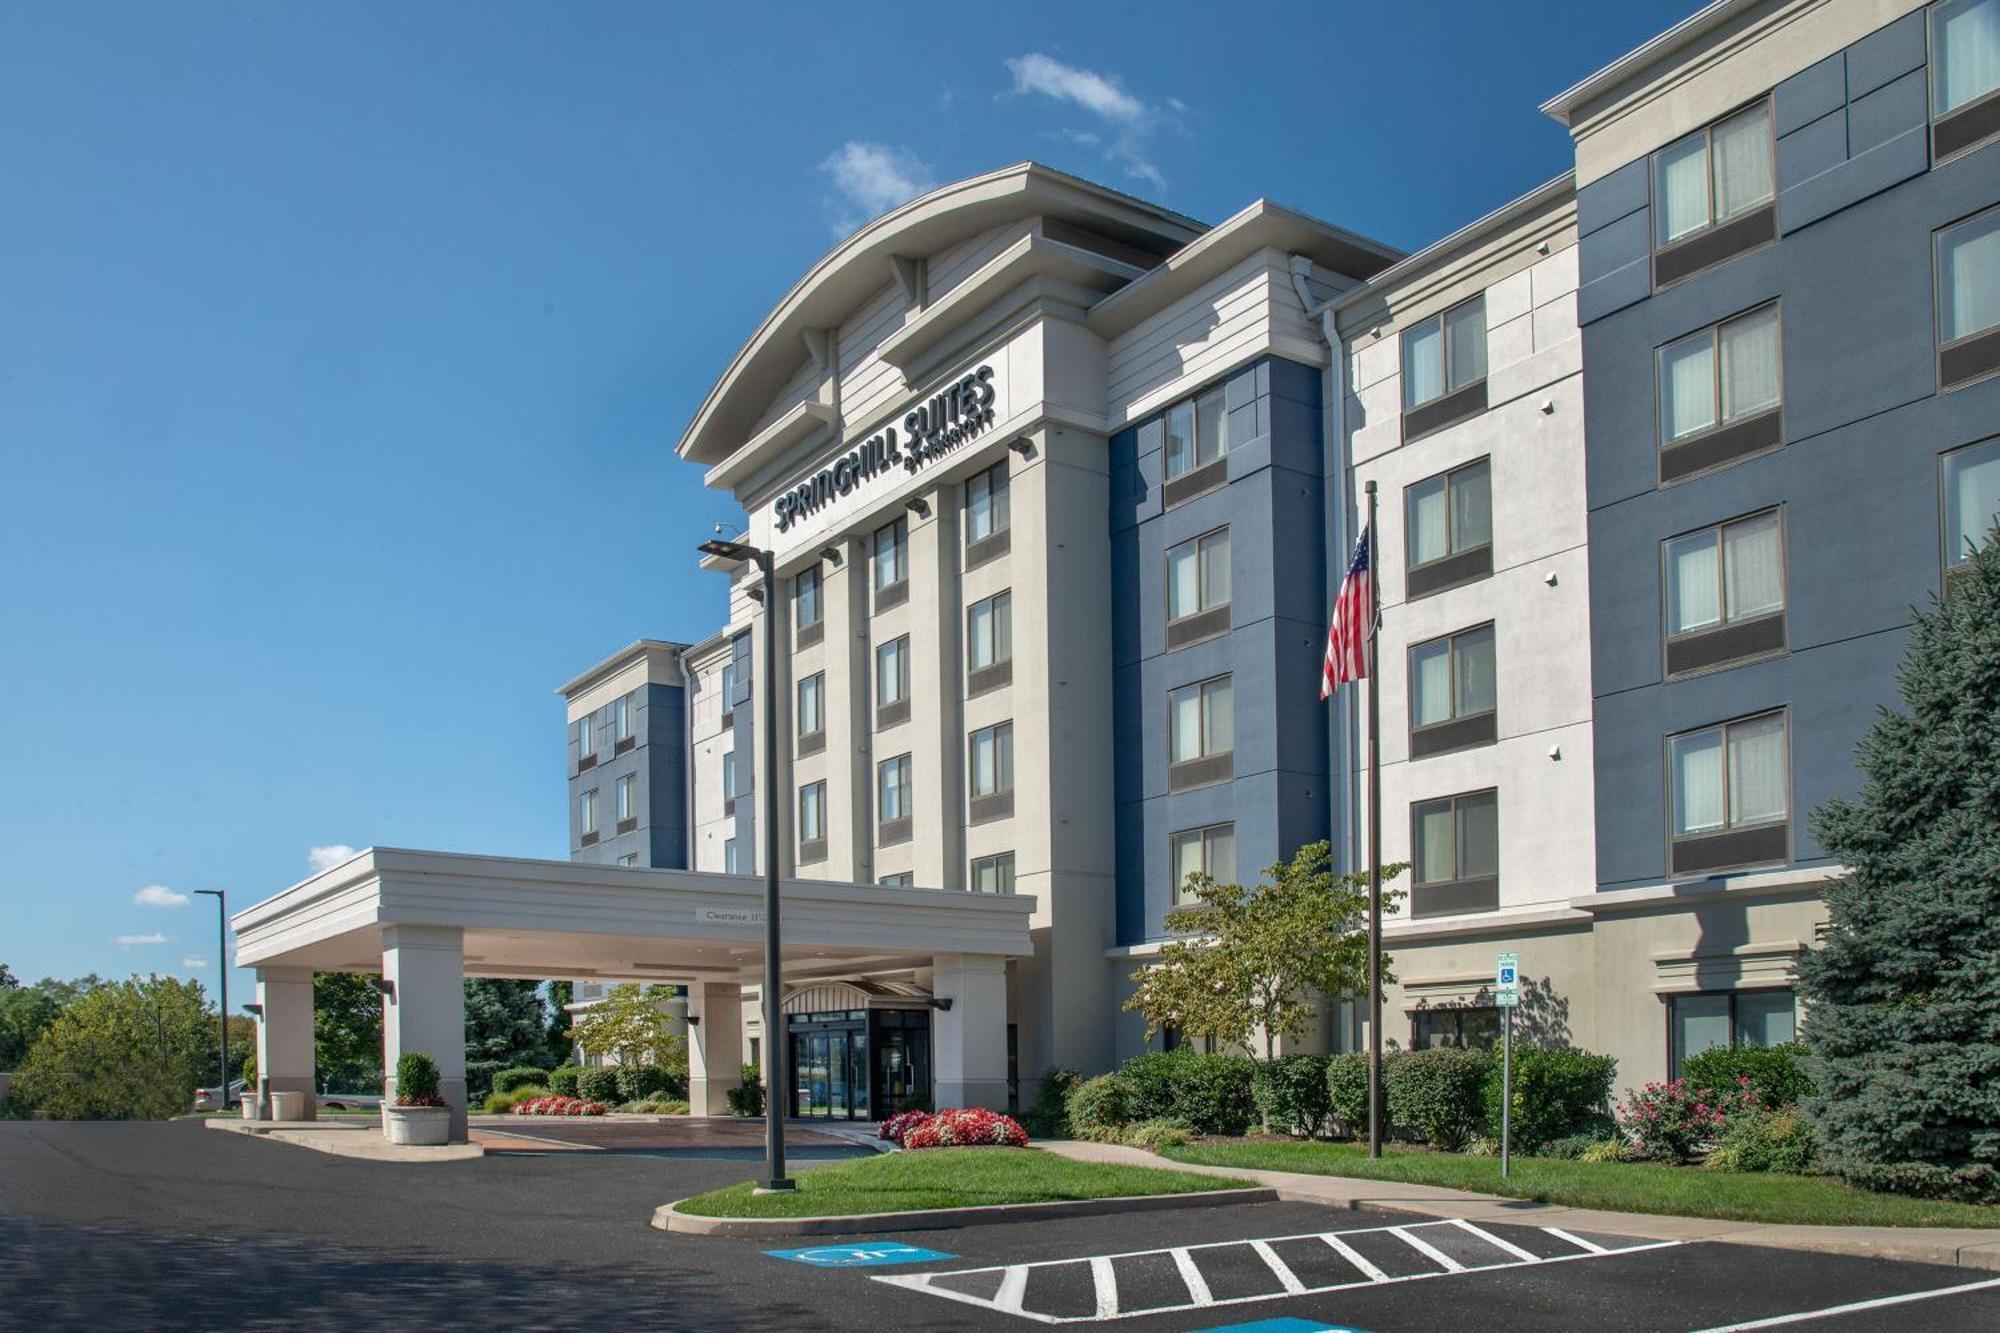 Springhill Suites Hagerstown Exterior photo